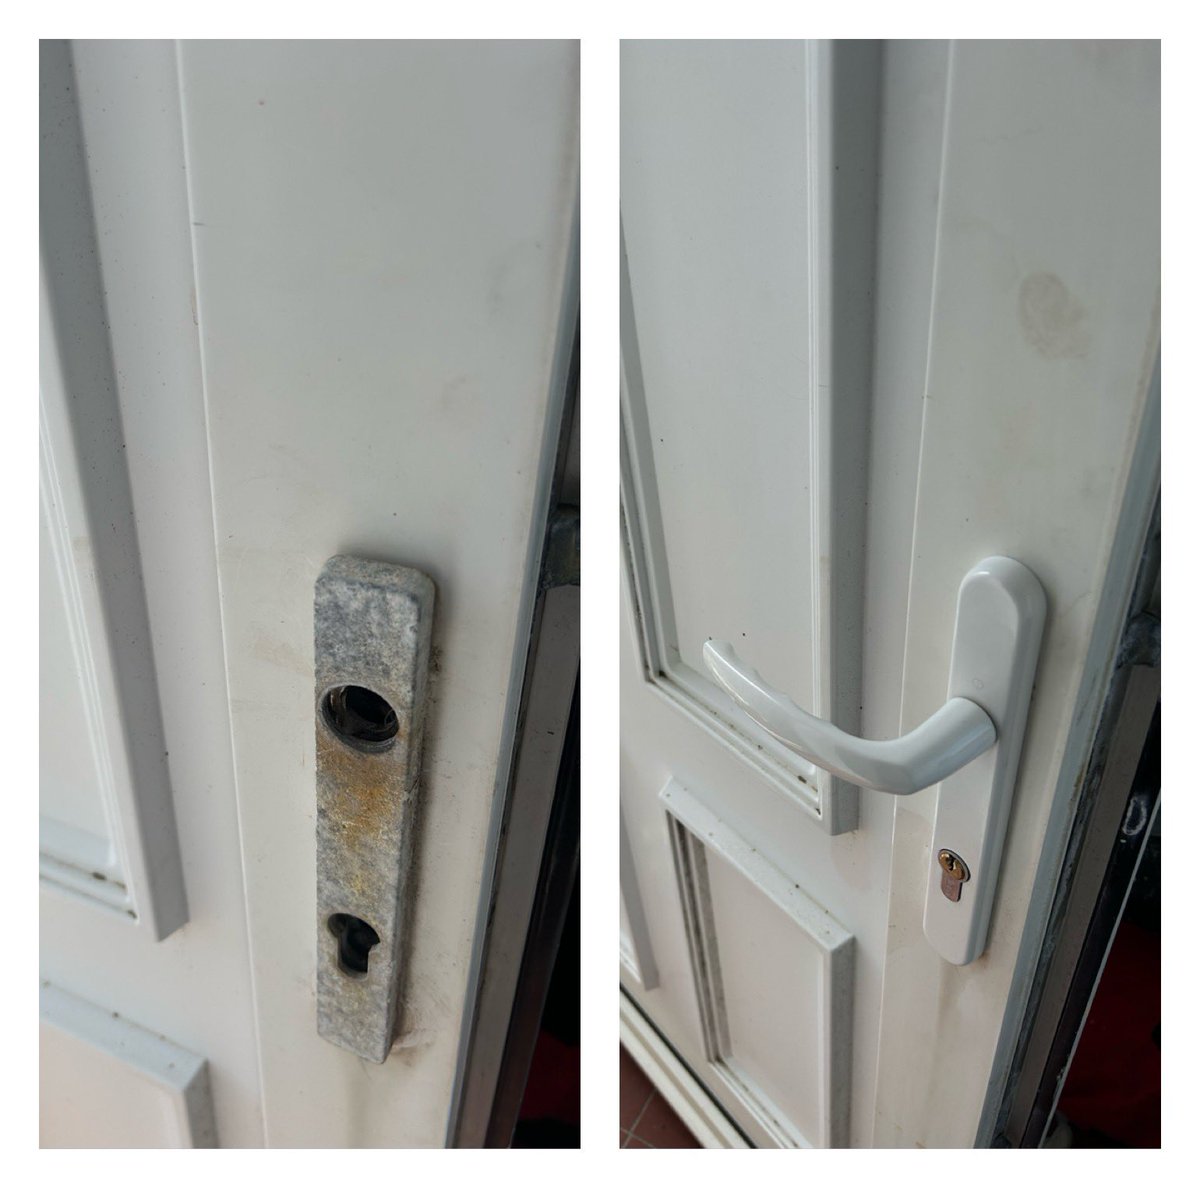 Broken handles on uPVC door changed for new set with new cylinder fitted as well #carmarthenshire  #carmarthen #localbuisness #locksmithlife